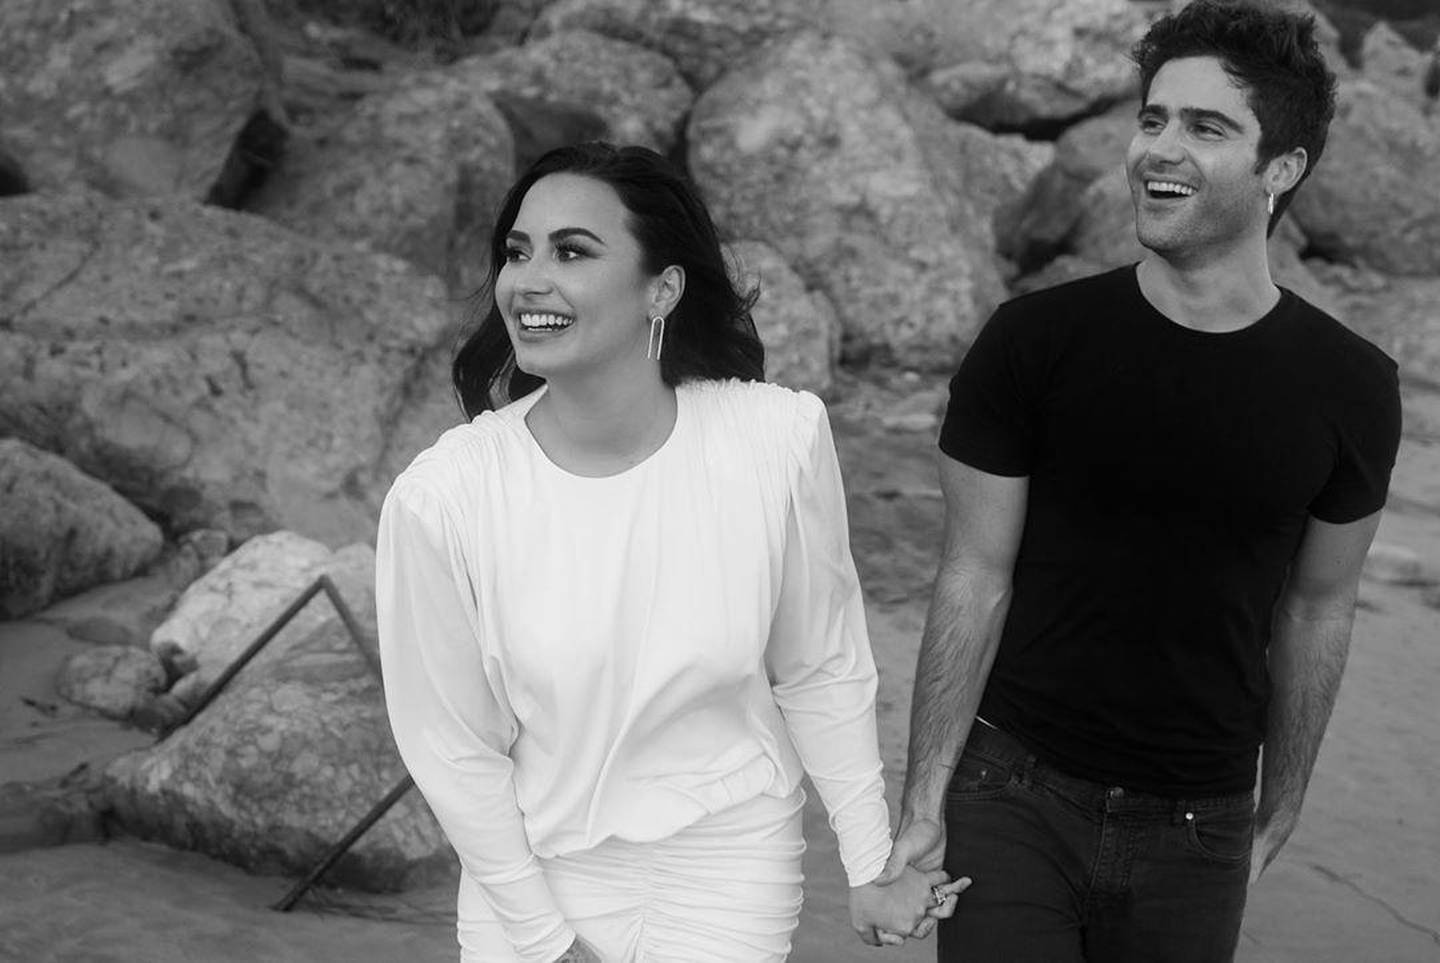 Demi Lovato and Max Ehrich got engaged after two months together, after he proposed with a $1 million ring. Instagram / Max Ehrich